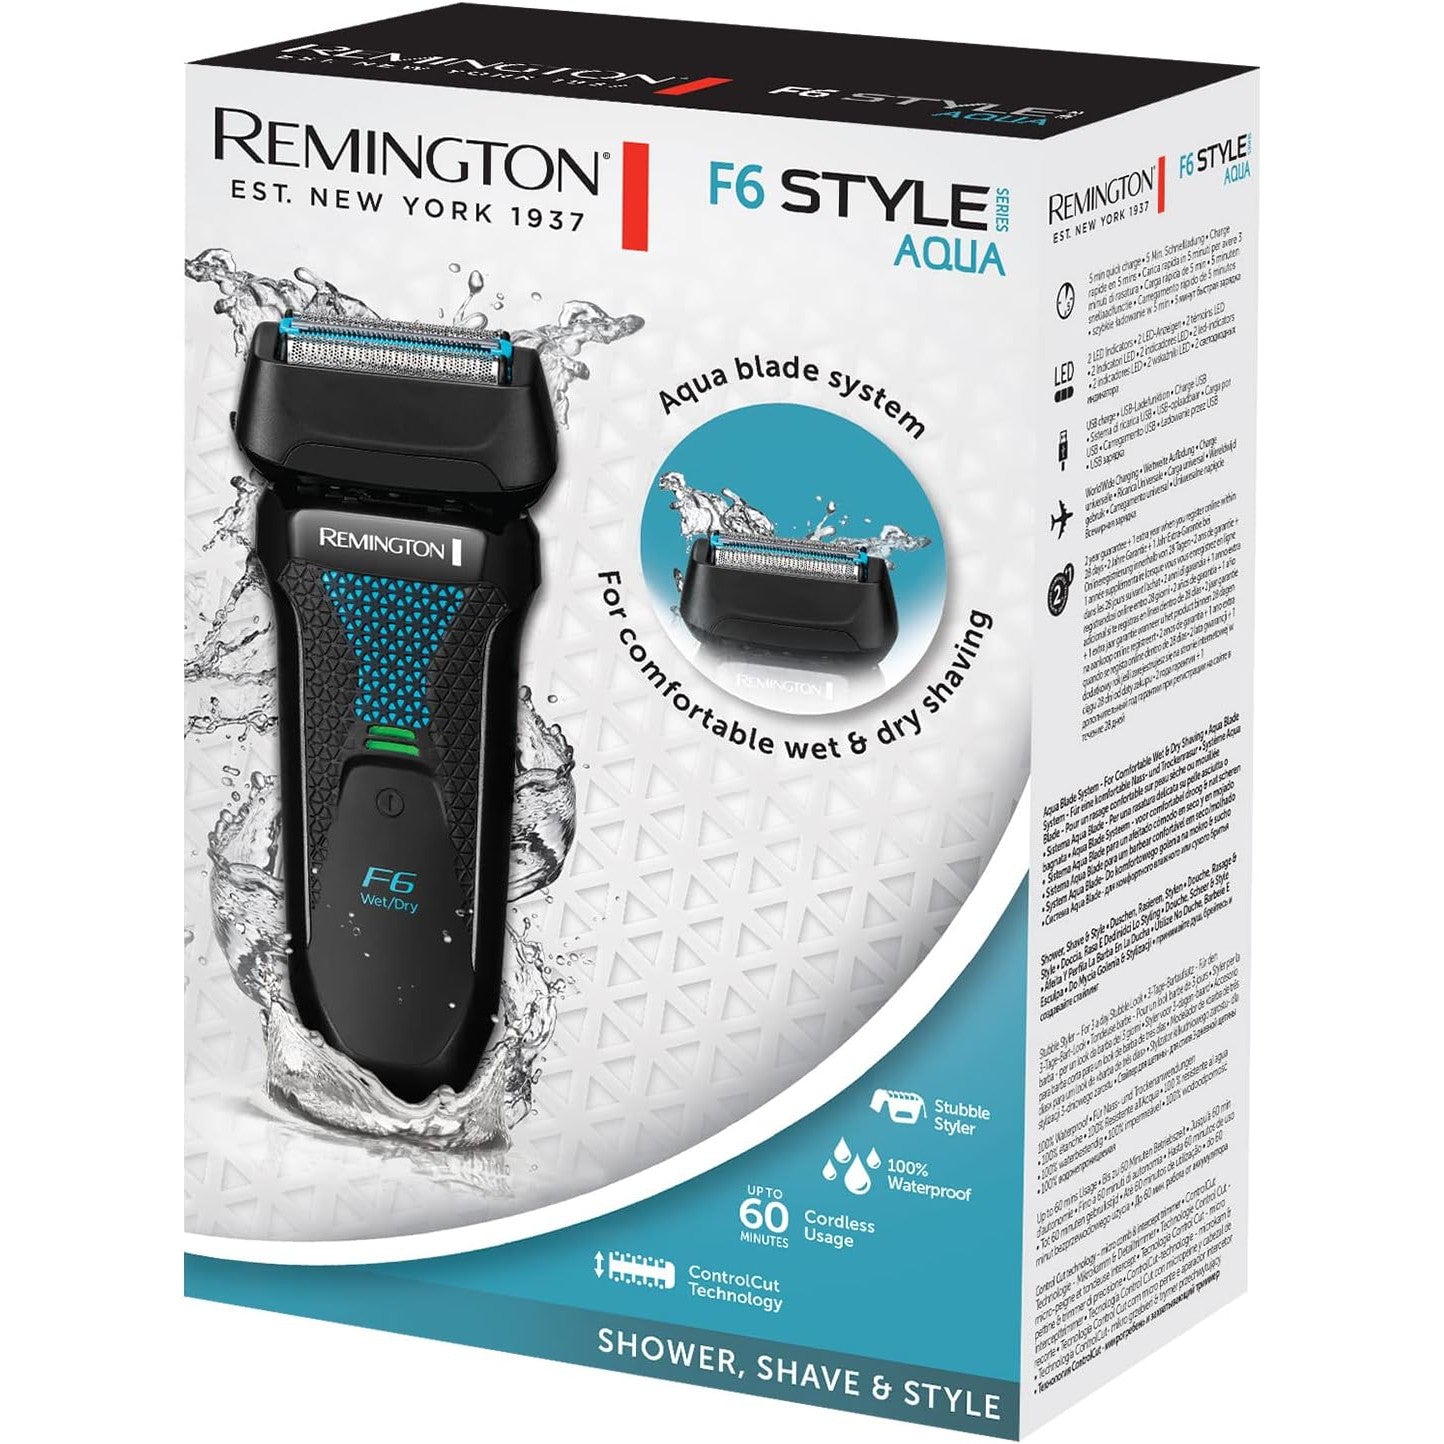 Remington F6 Style Series Aqua Electric Shaver for Men - 100% Waterproof Cordless Foil Razor with USB Charging and Pop-Up Trimmer; F6000, Black